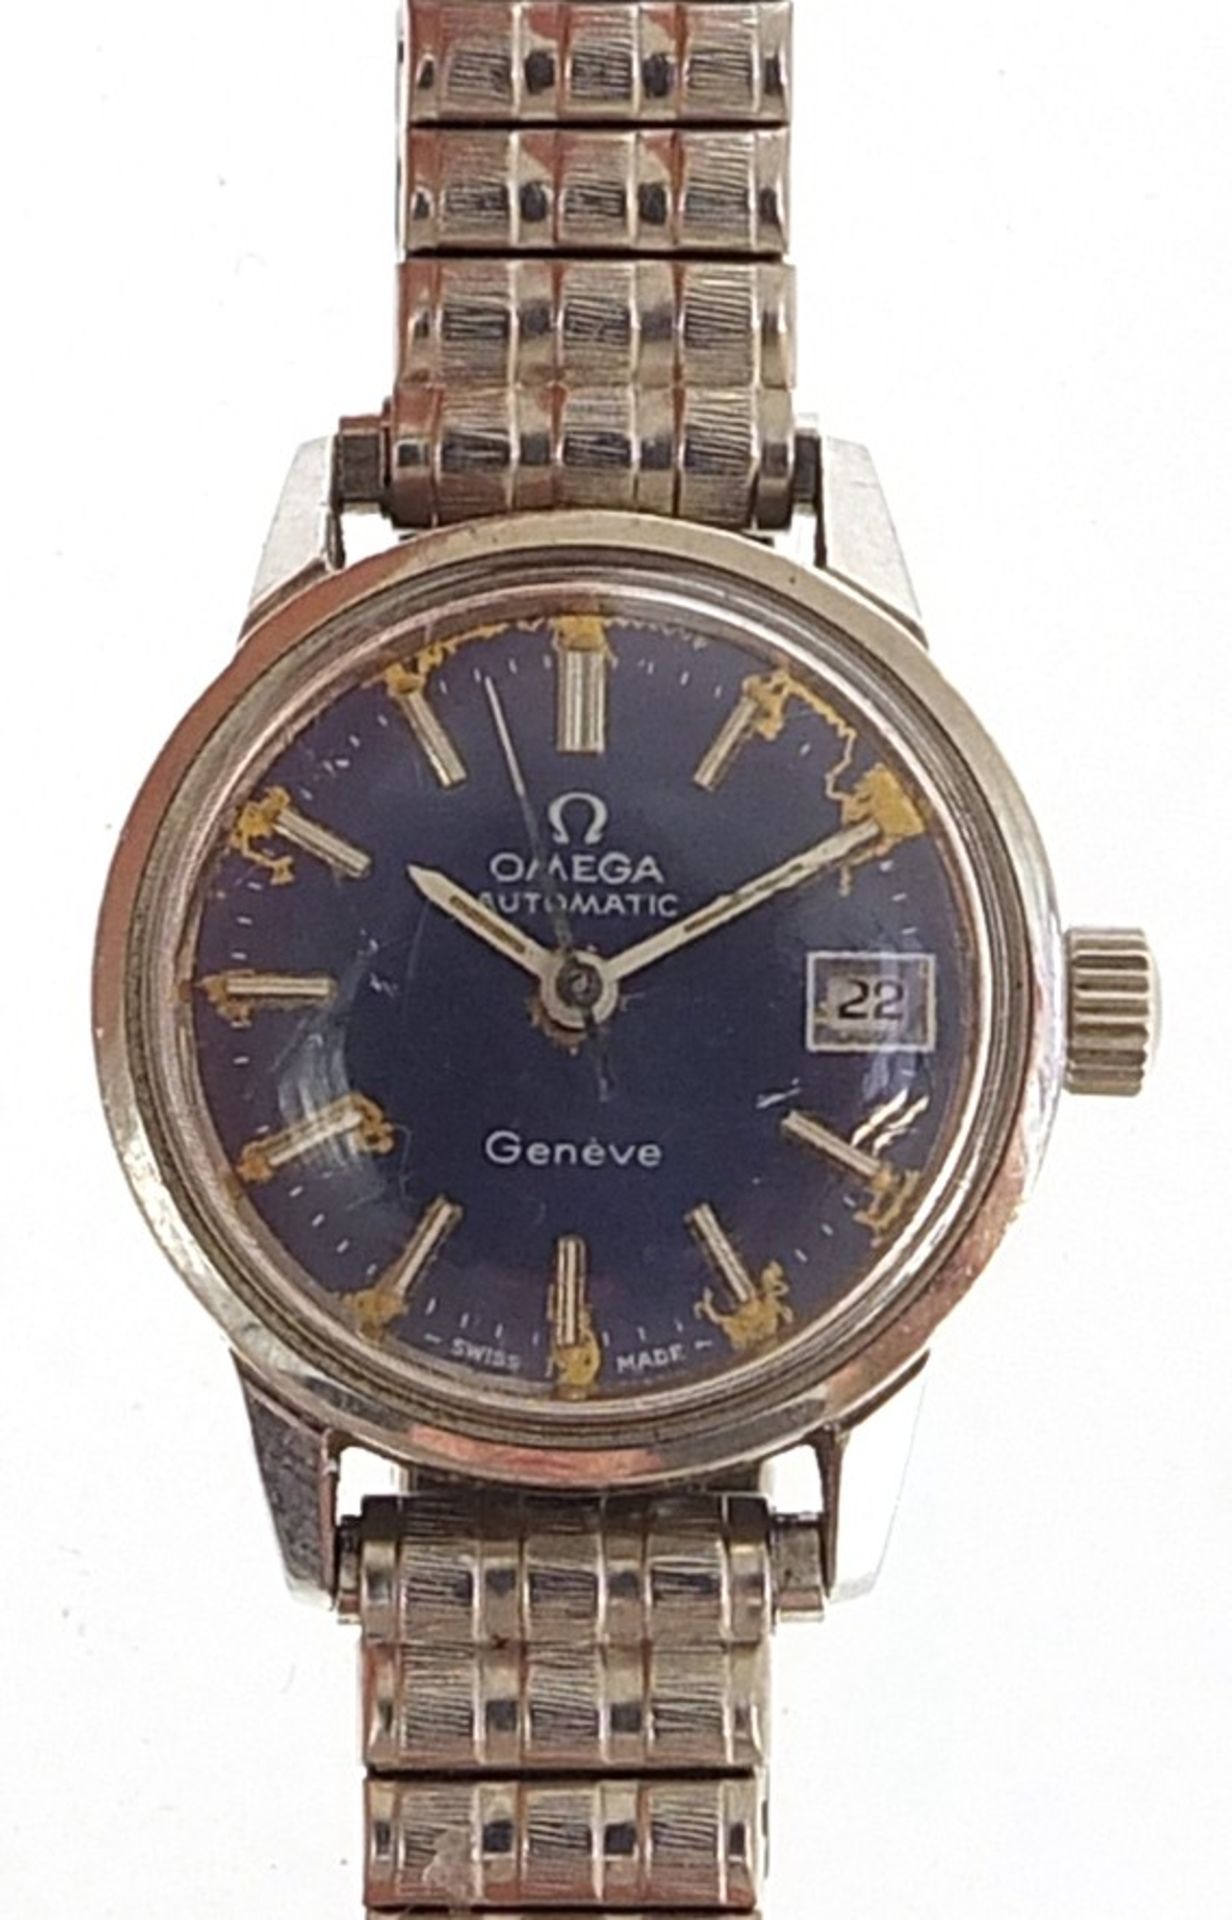 Omega, ladies Omega Geneve automatic wristwatch with date aperture, 22mm in diameter